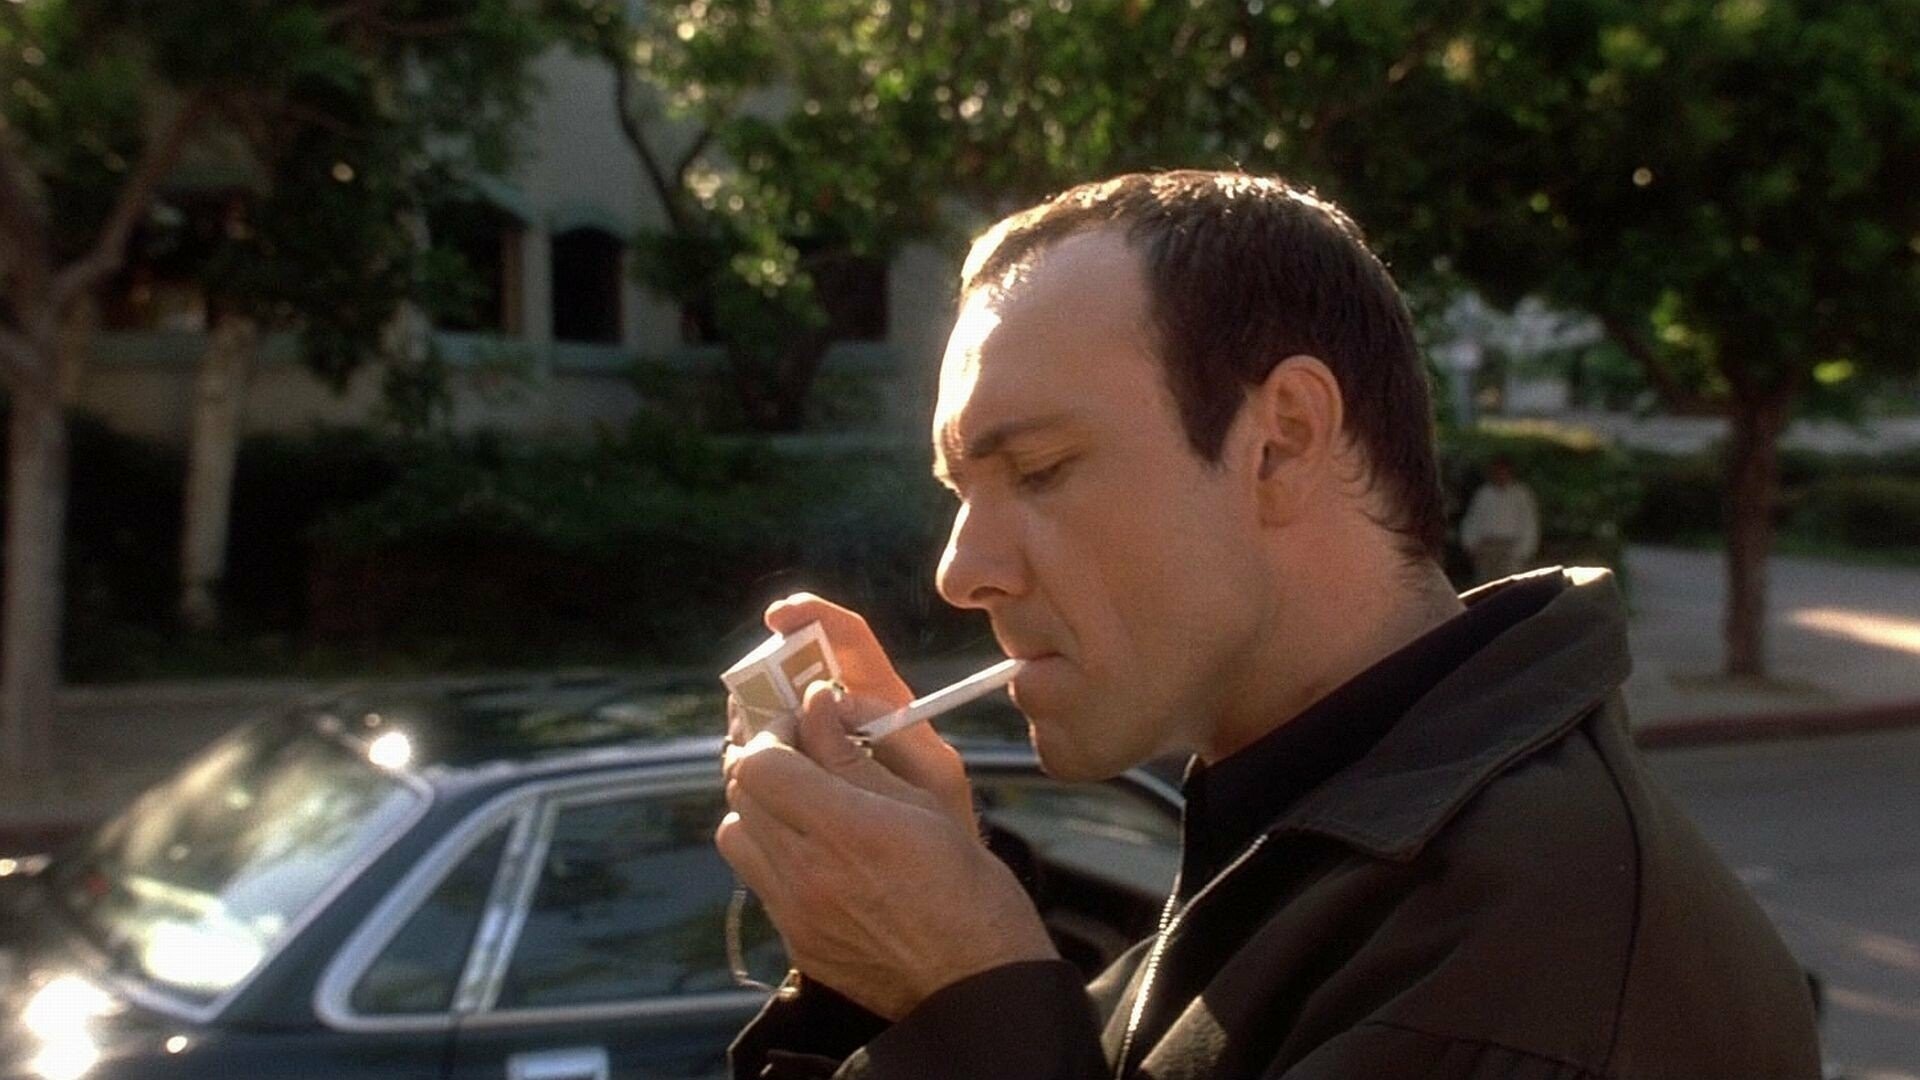 The Usual Suspects: Kevin Spacey as Roger 'Verbal' Kint / Keyser Soze, The main antagonist. 1920x1080 Full HD Wallpaper.